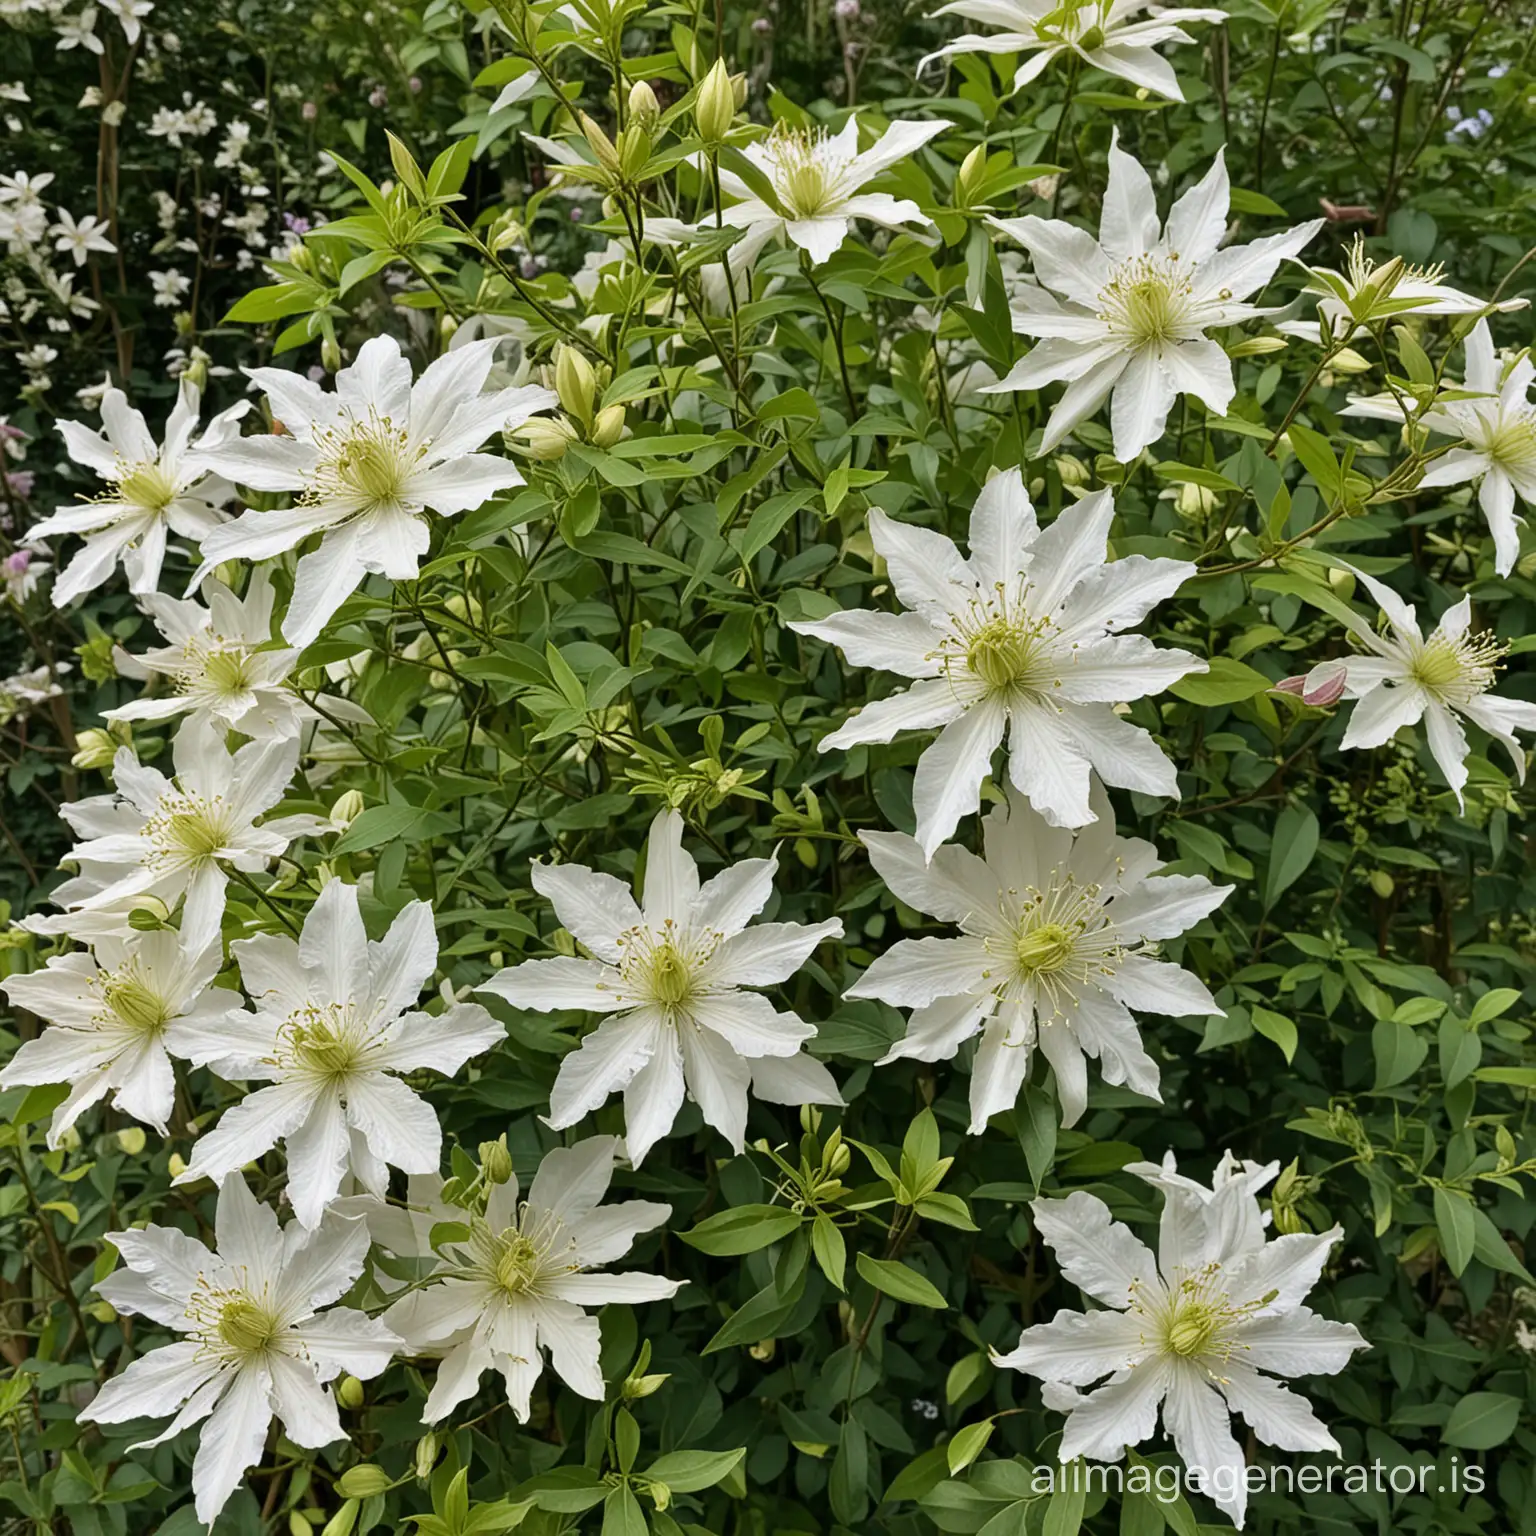 Clematis-Vitalba-Lush-White-Blooms-of-Climbing-Plants-in-Serene-Forest-Setting